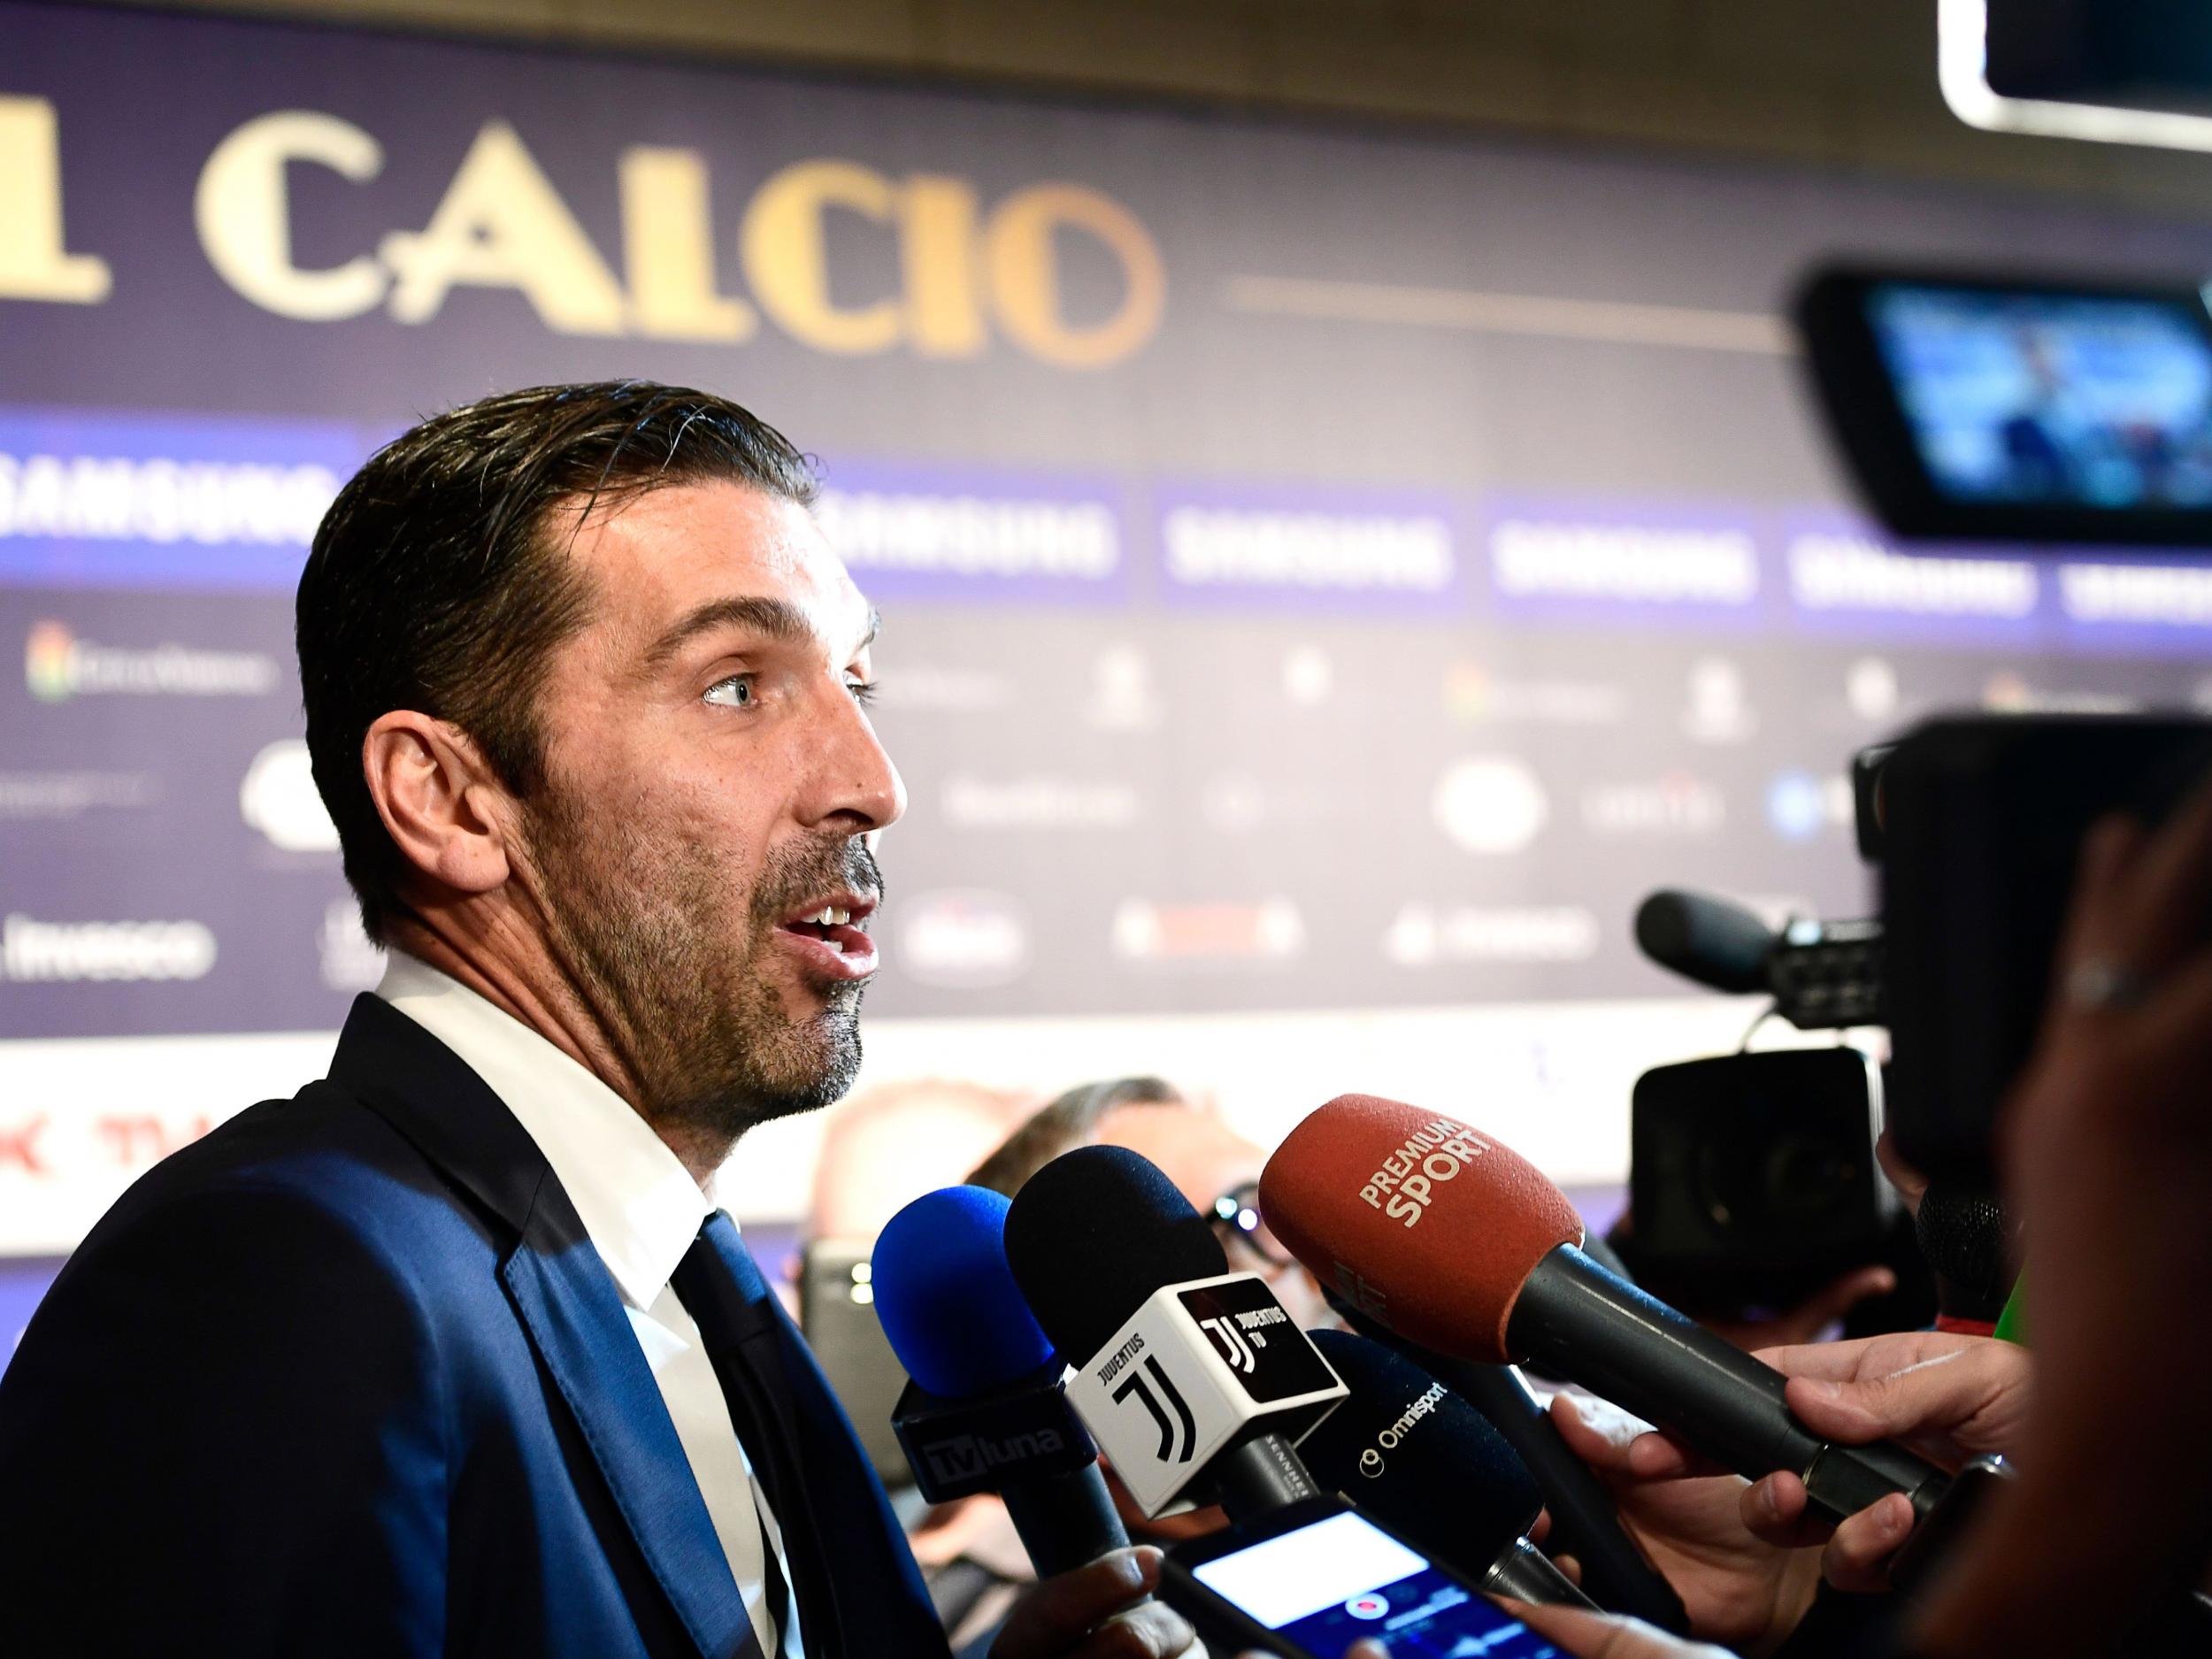 Buffon was named Italian player of the year on Monday